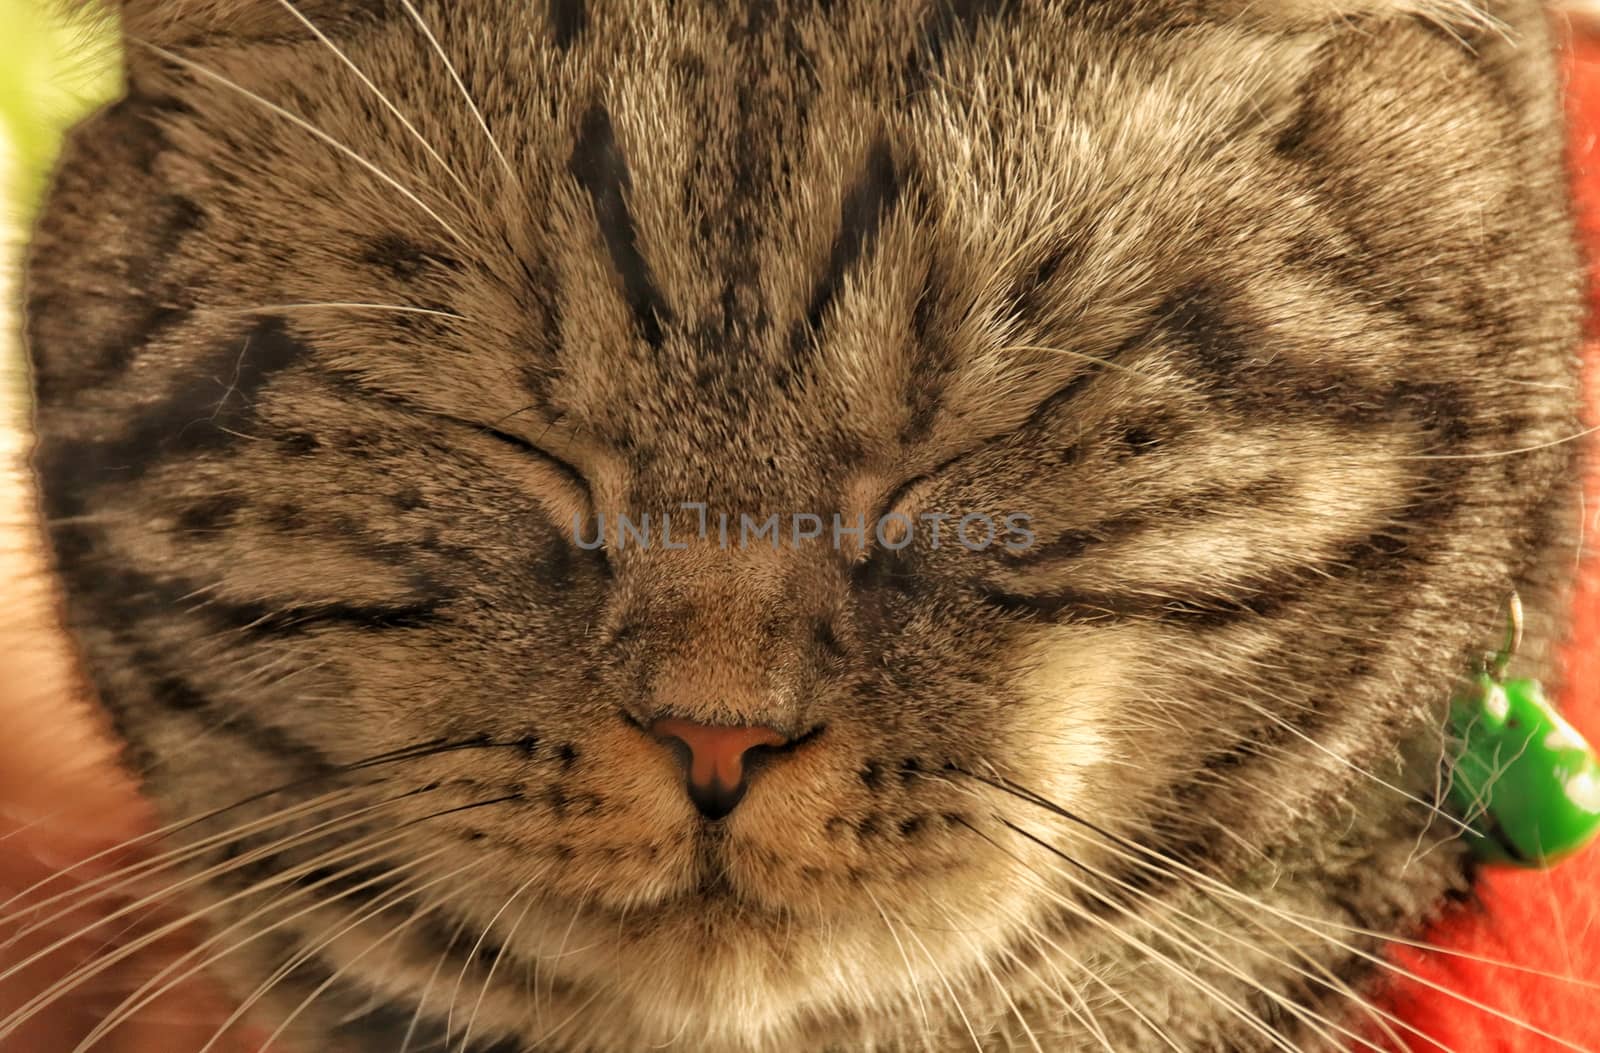 Angry Cat Face by Sonnet15